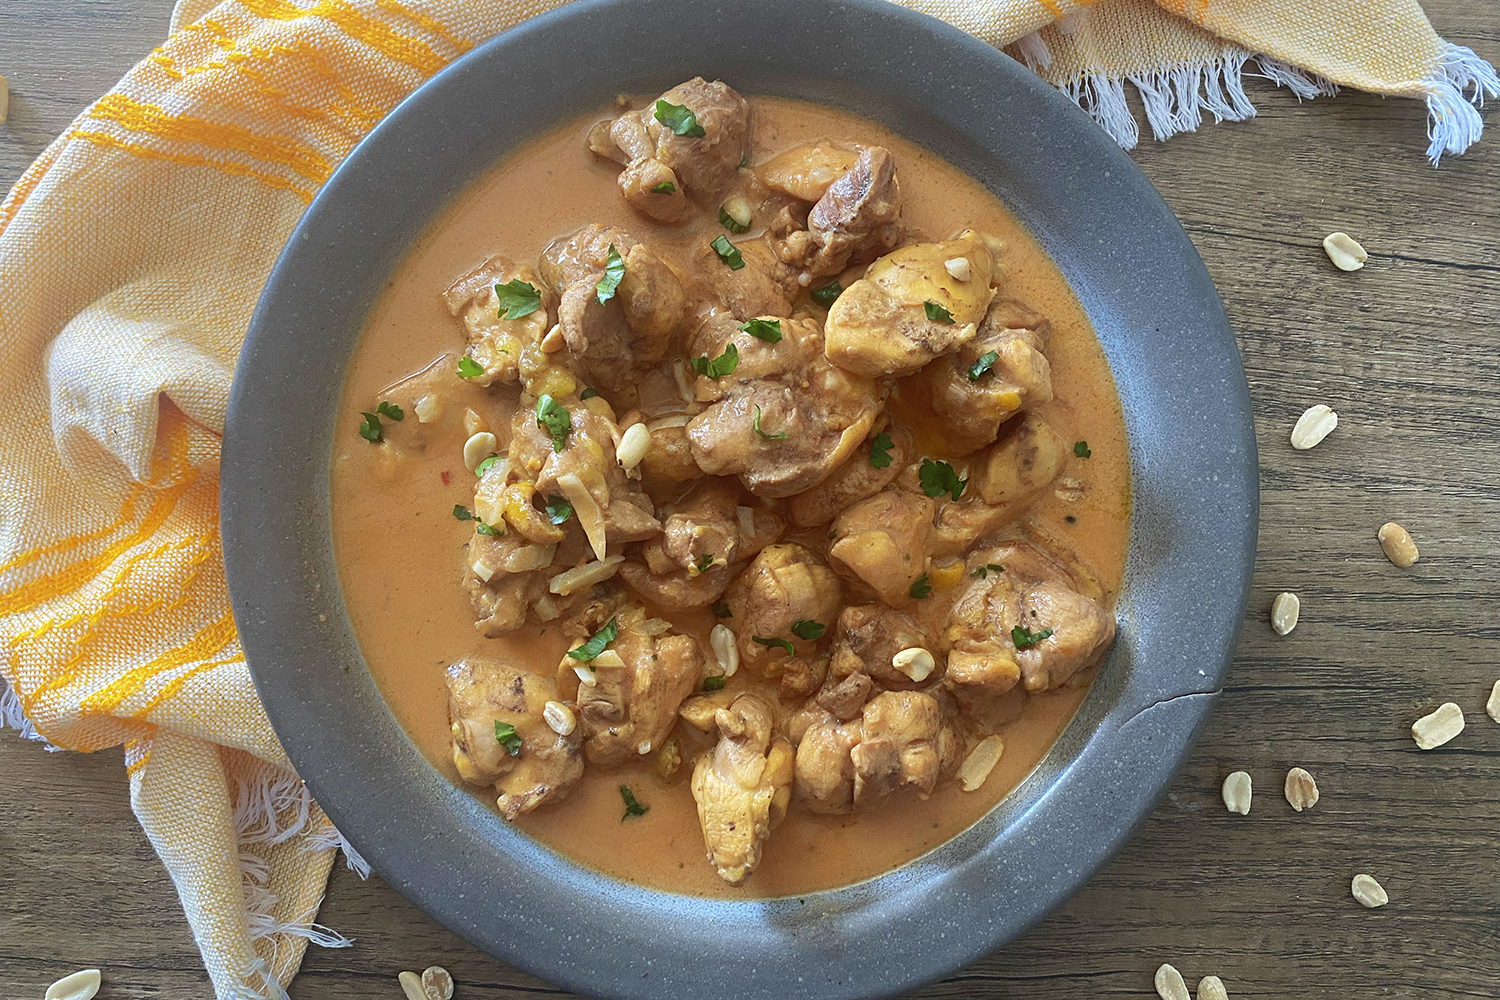 Peanut Butter Chicken pieces in an orange sauce in a blue plate top view